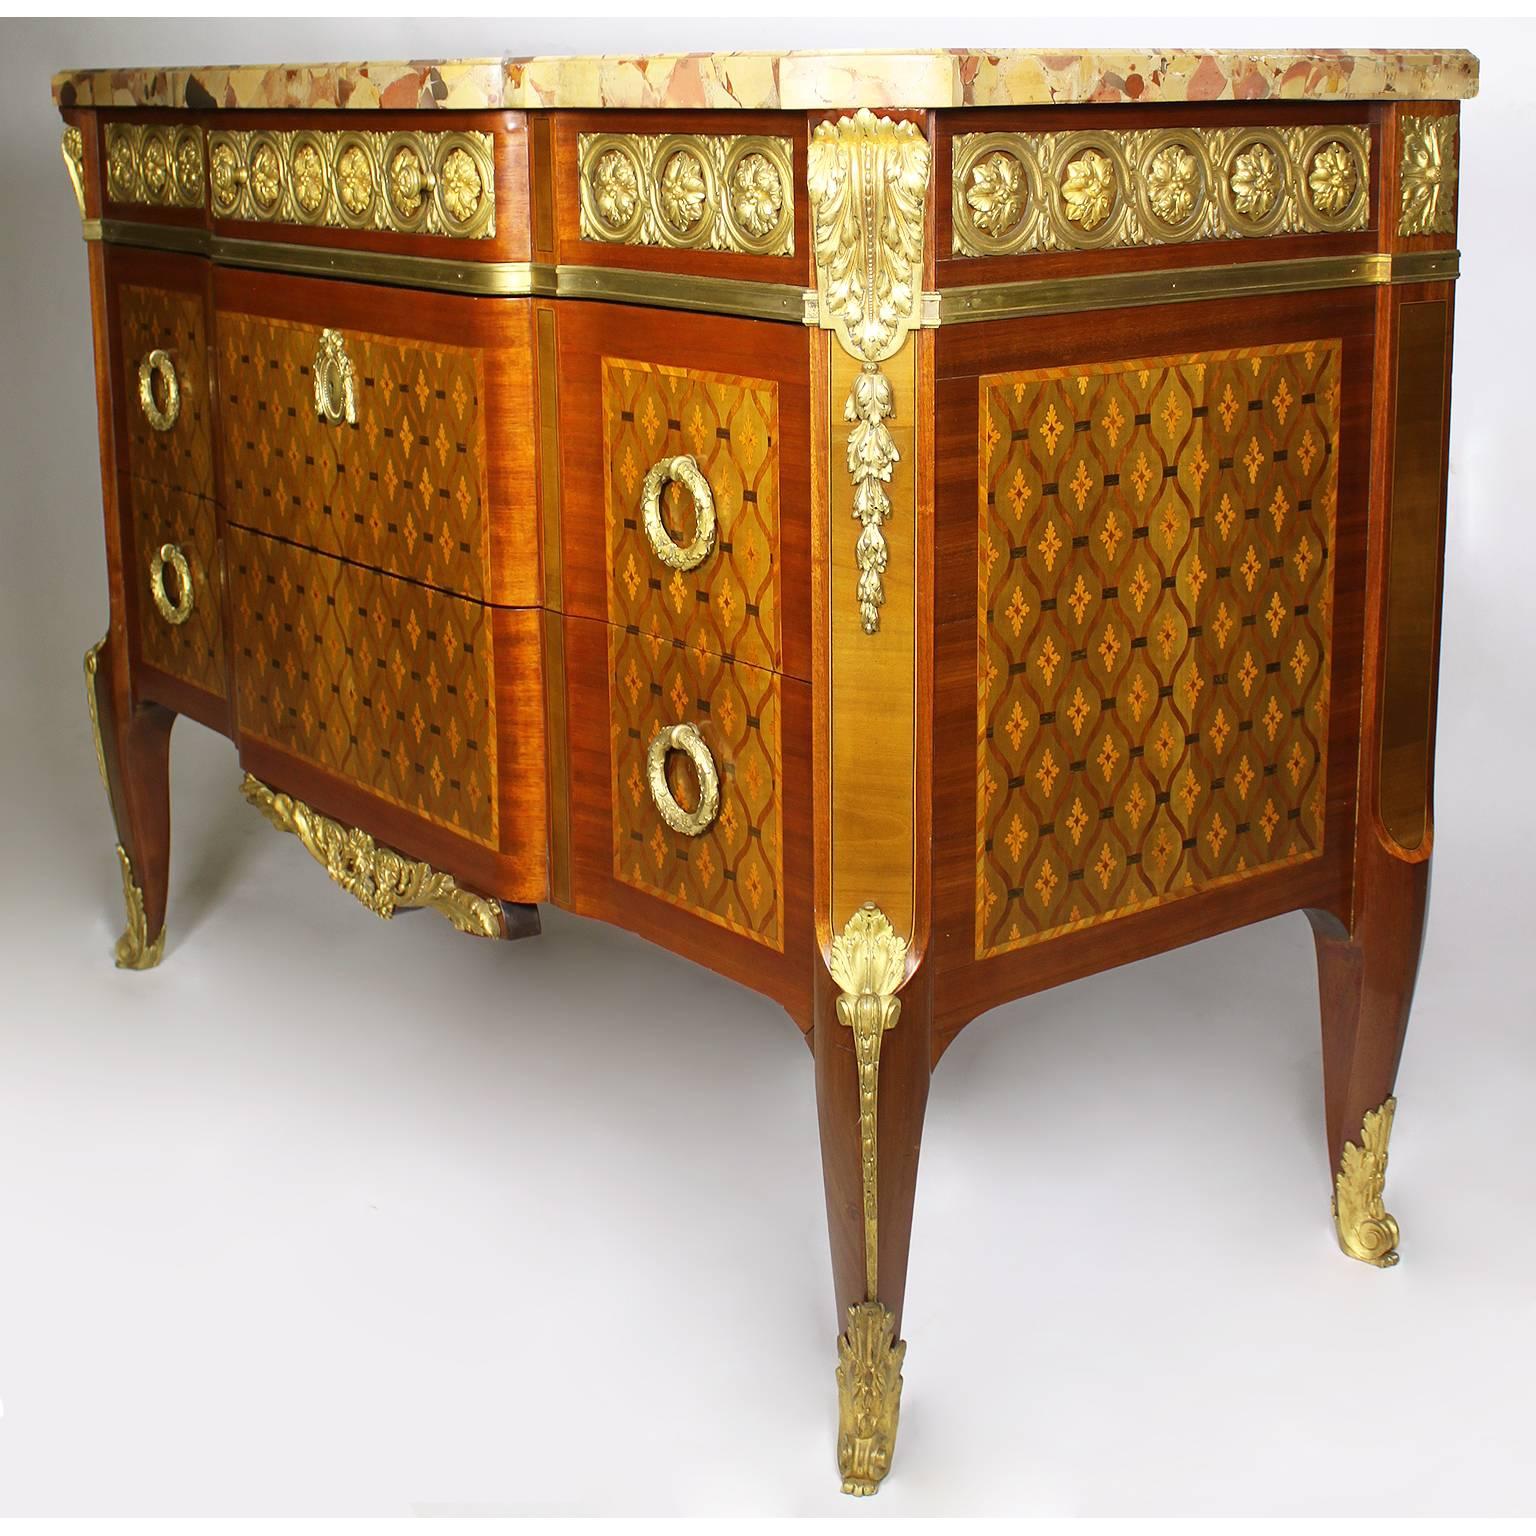 French 19th Century Finely Chased Ormolu Mounted Regence Style Marquetry Commode For Sale 1